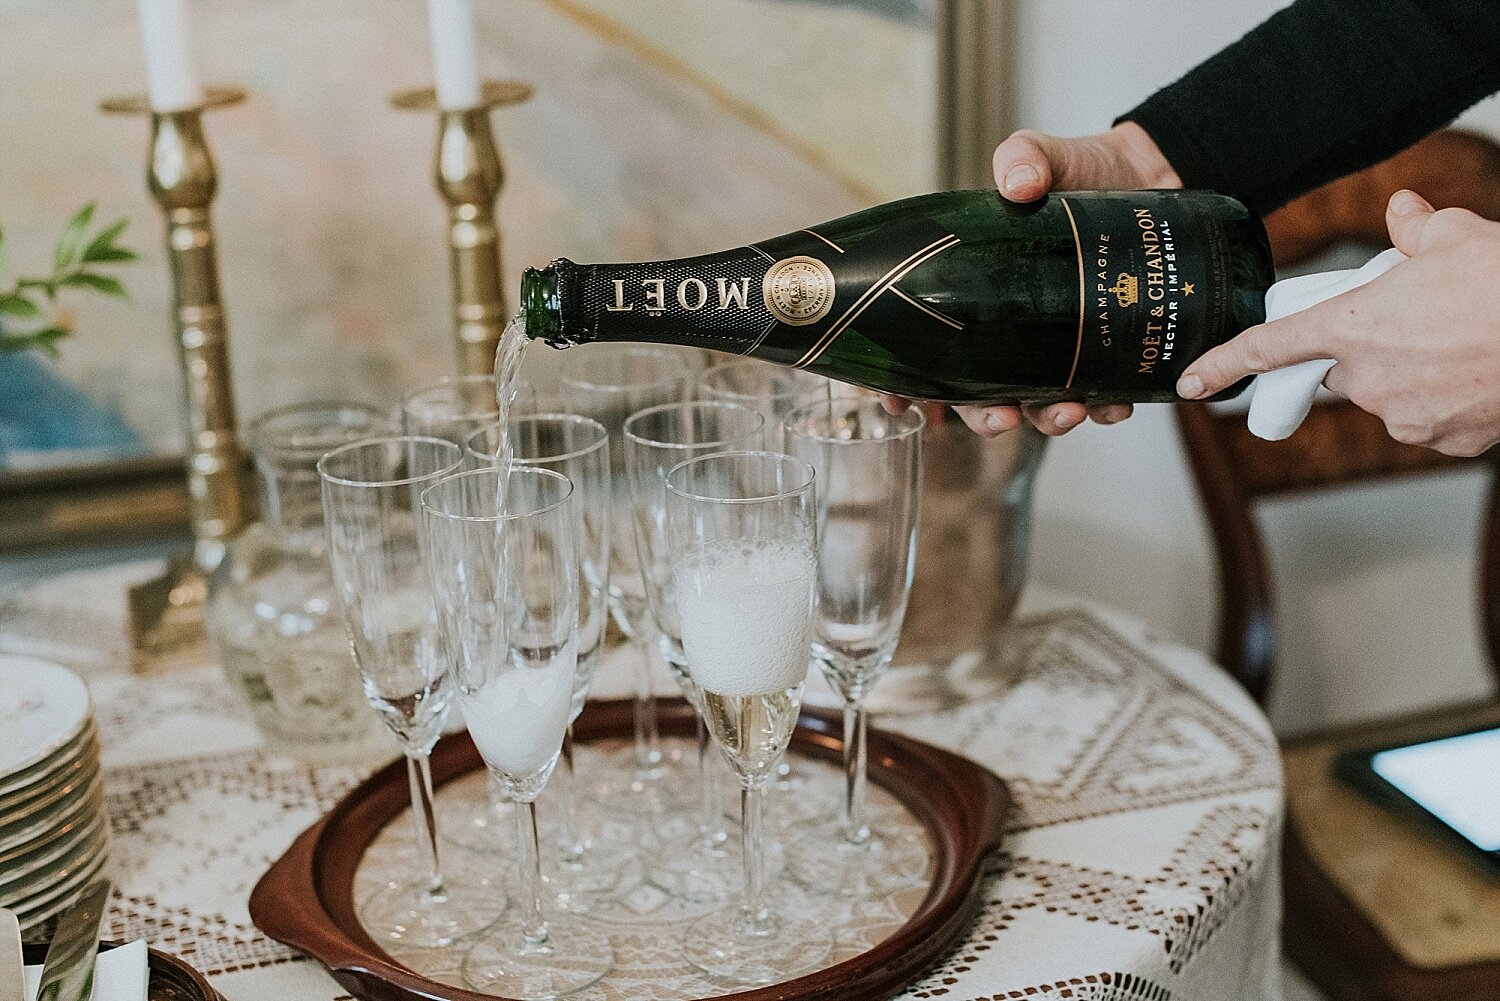 pouring champagne at intimate wedding reception in denmark